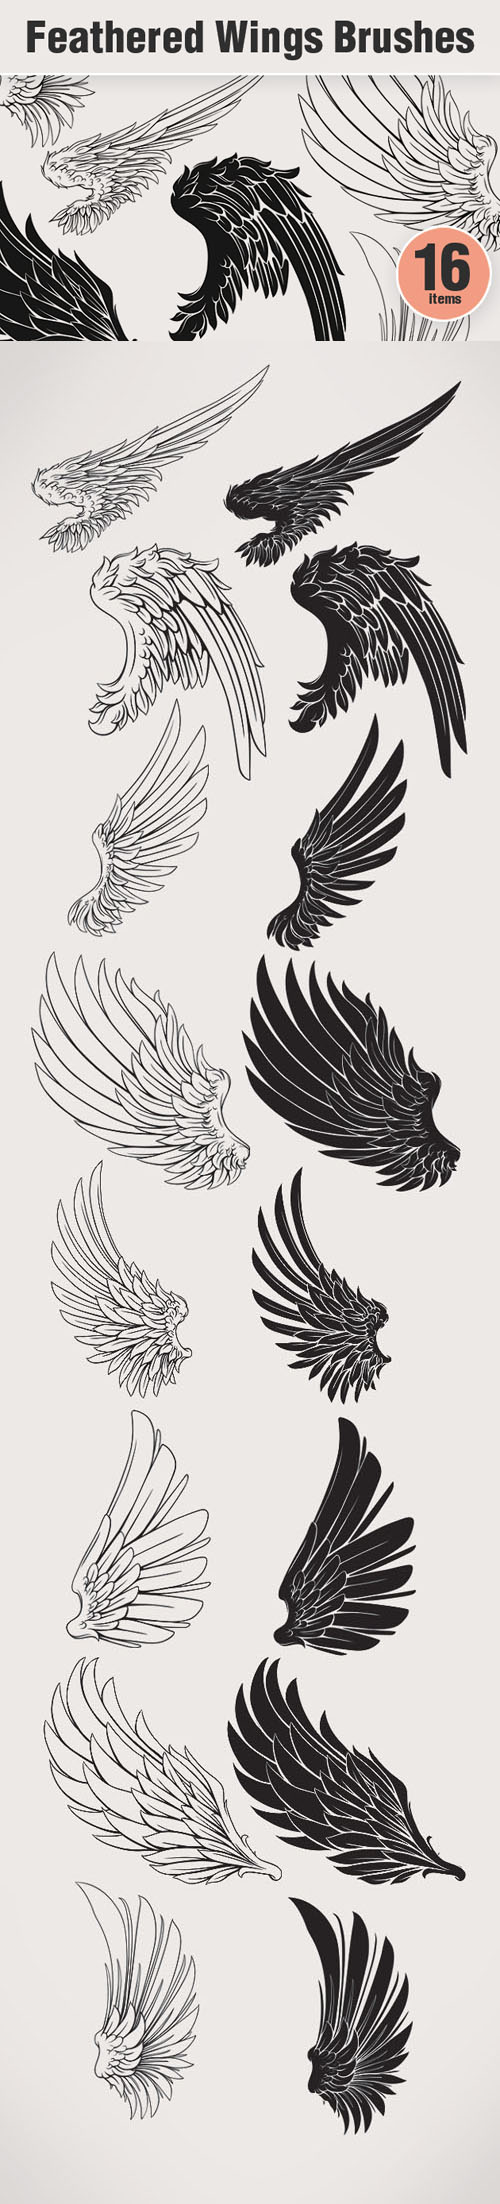 Designtnt - Feathered Wings PS Brushes